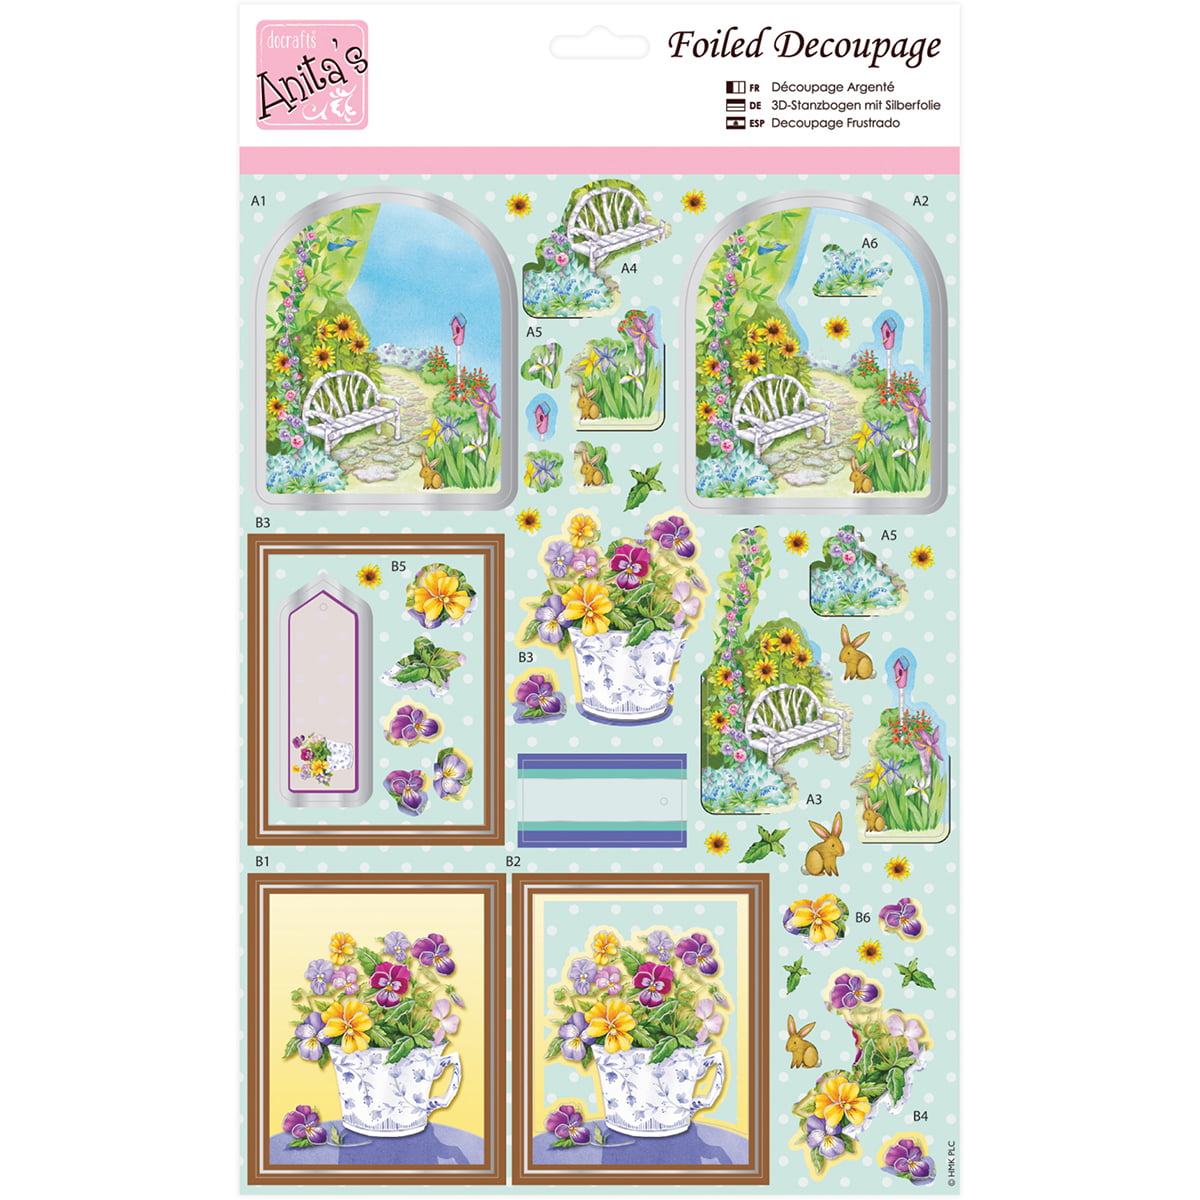 New Born Cribs Docrafts Anitas Decoupage Foiled